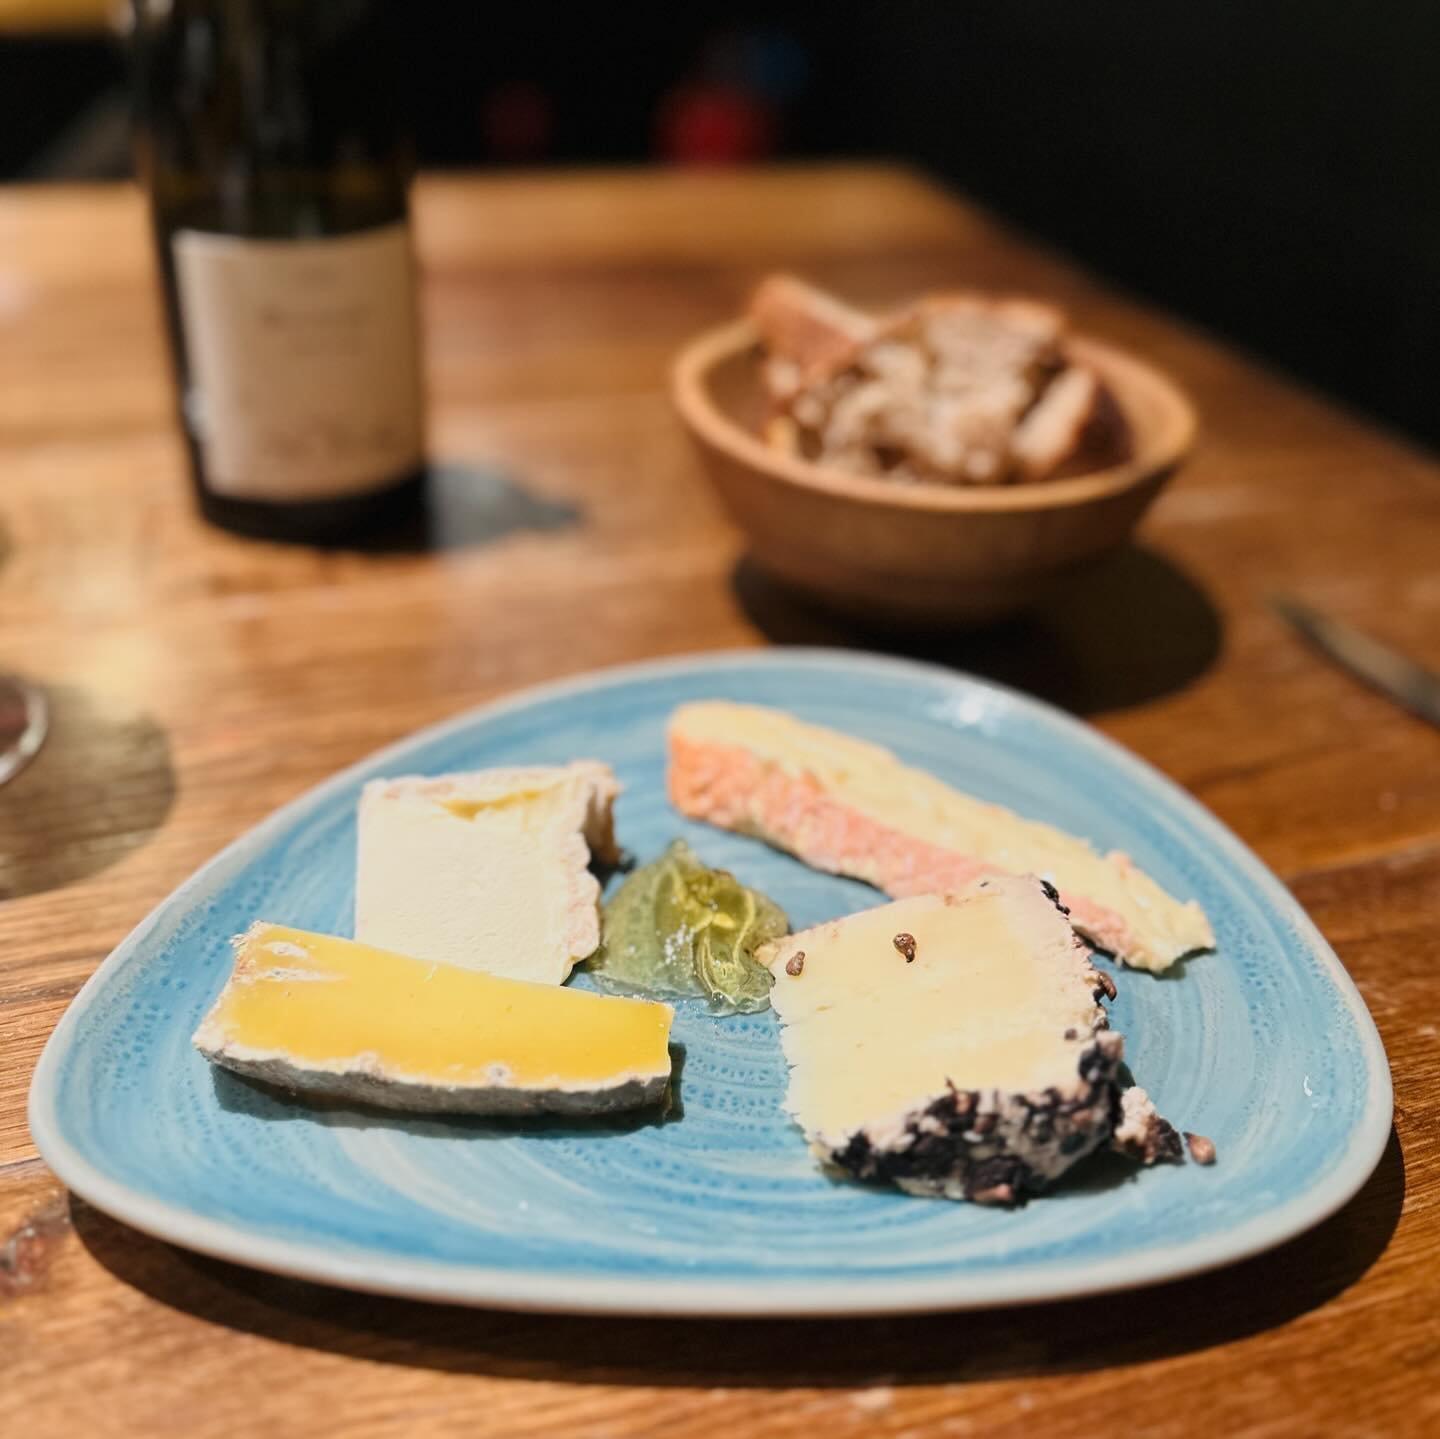 When in Burgundy, you have to stop at @tabledusquare for a meal. The food is consistently satiating, heartwarming, comfortable, and nostalgic. The service is always warm and inviting and the wine list will satisfy even the pickiest nerd. I always loo